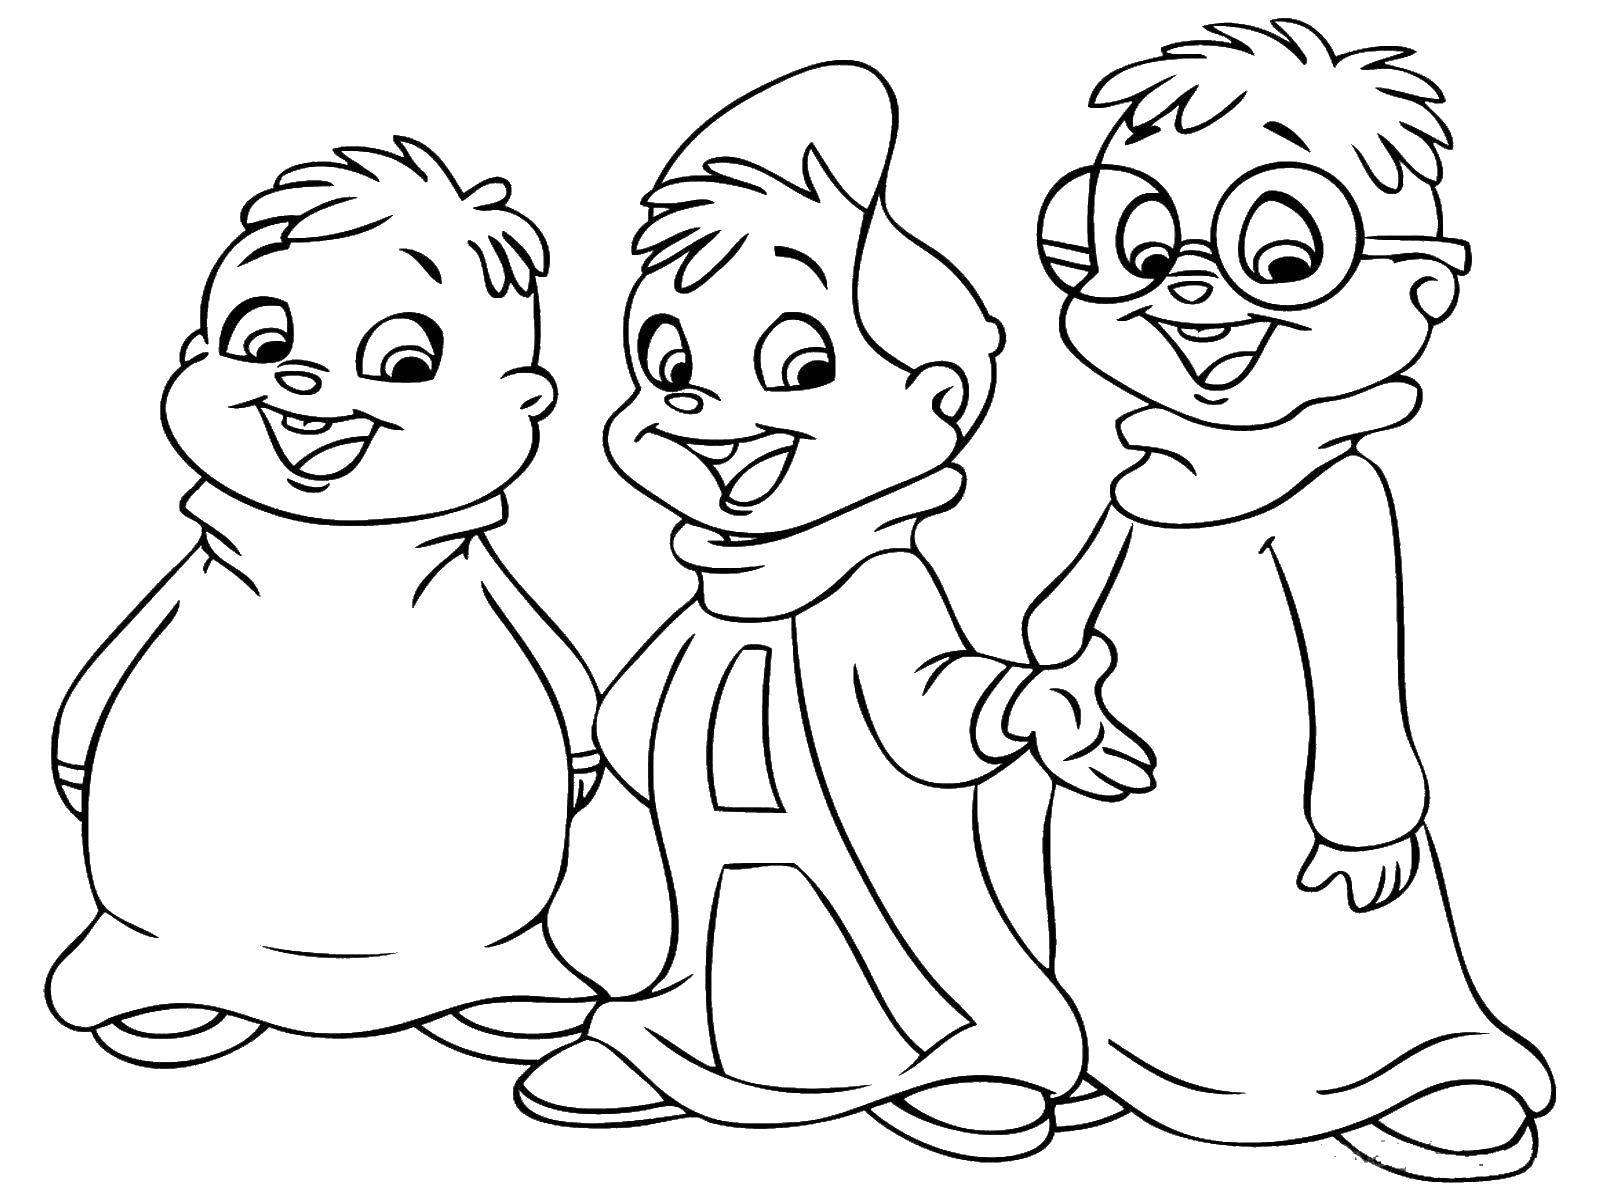 Coloring Alvin and his brothers the chipmunks. Category cartoons. Tags:  Alvin, chipmunks.